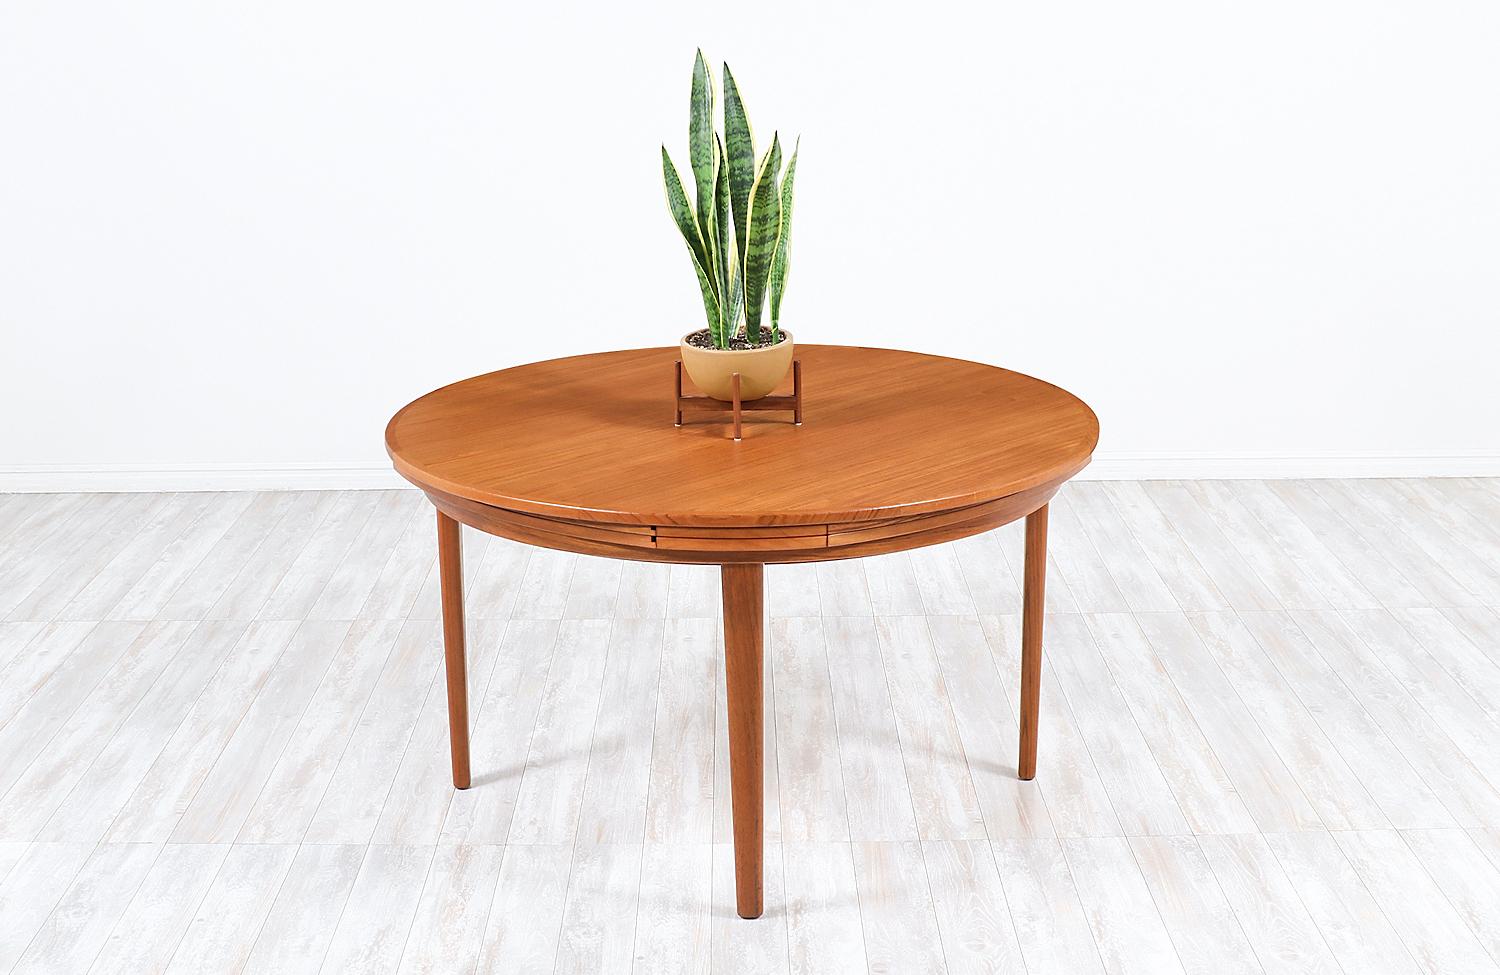 Danish modern “Flip-Flap” expanding teak dining table by Dyrlund 

Dimensions
28.75in H x 50.75in - 71in W 
Expands up to 71in.